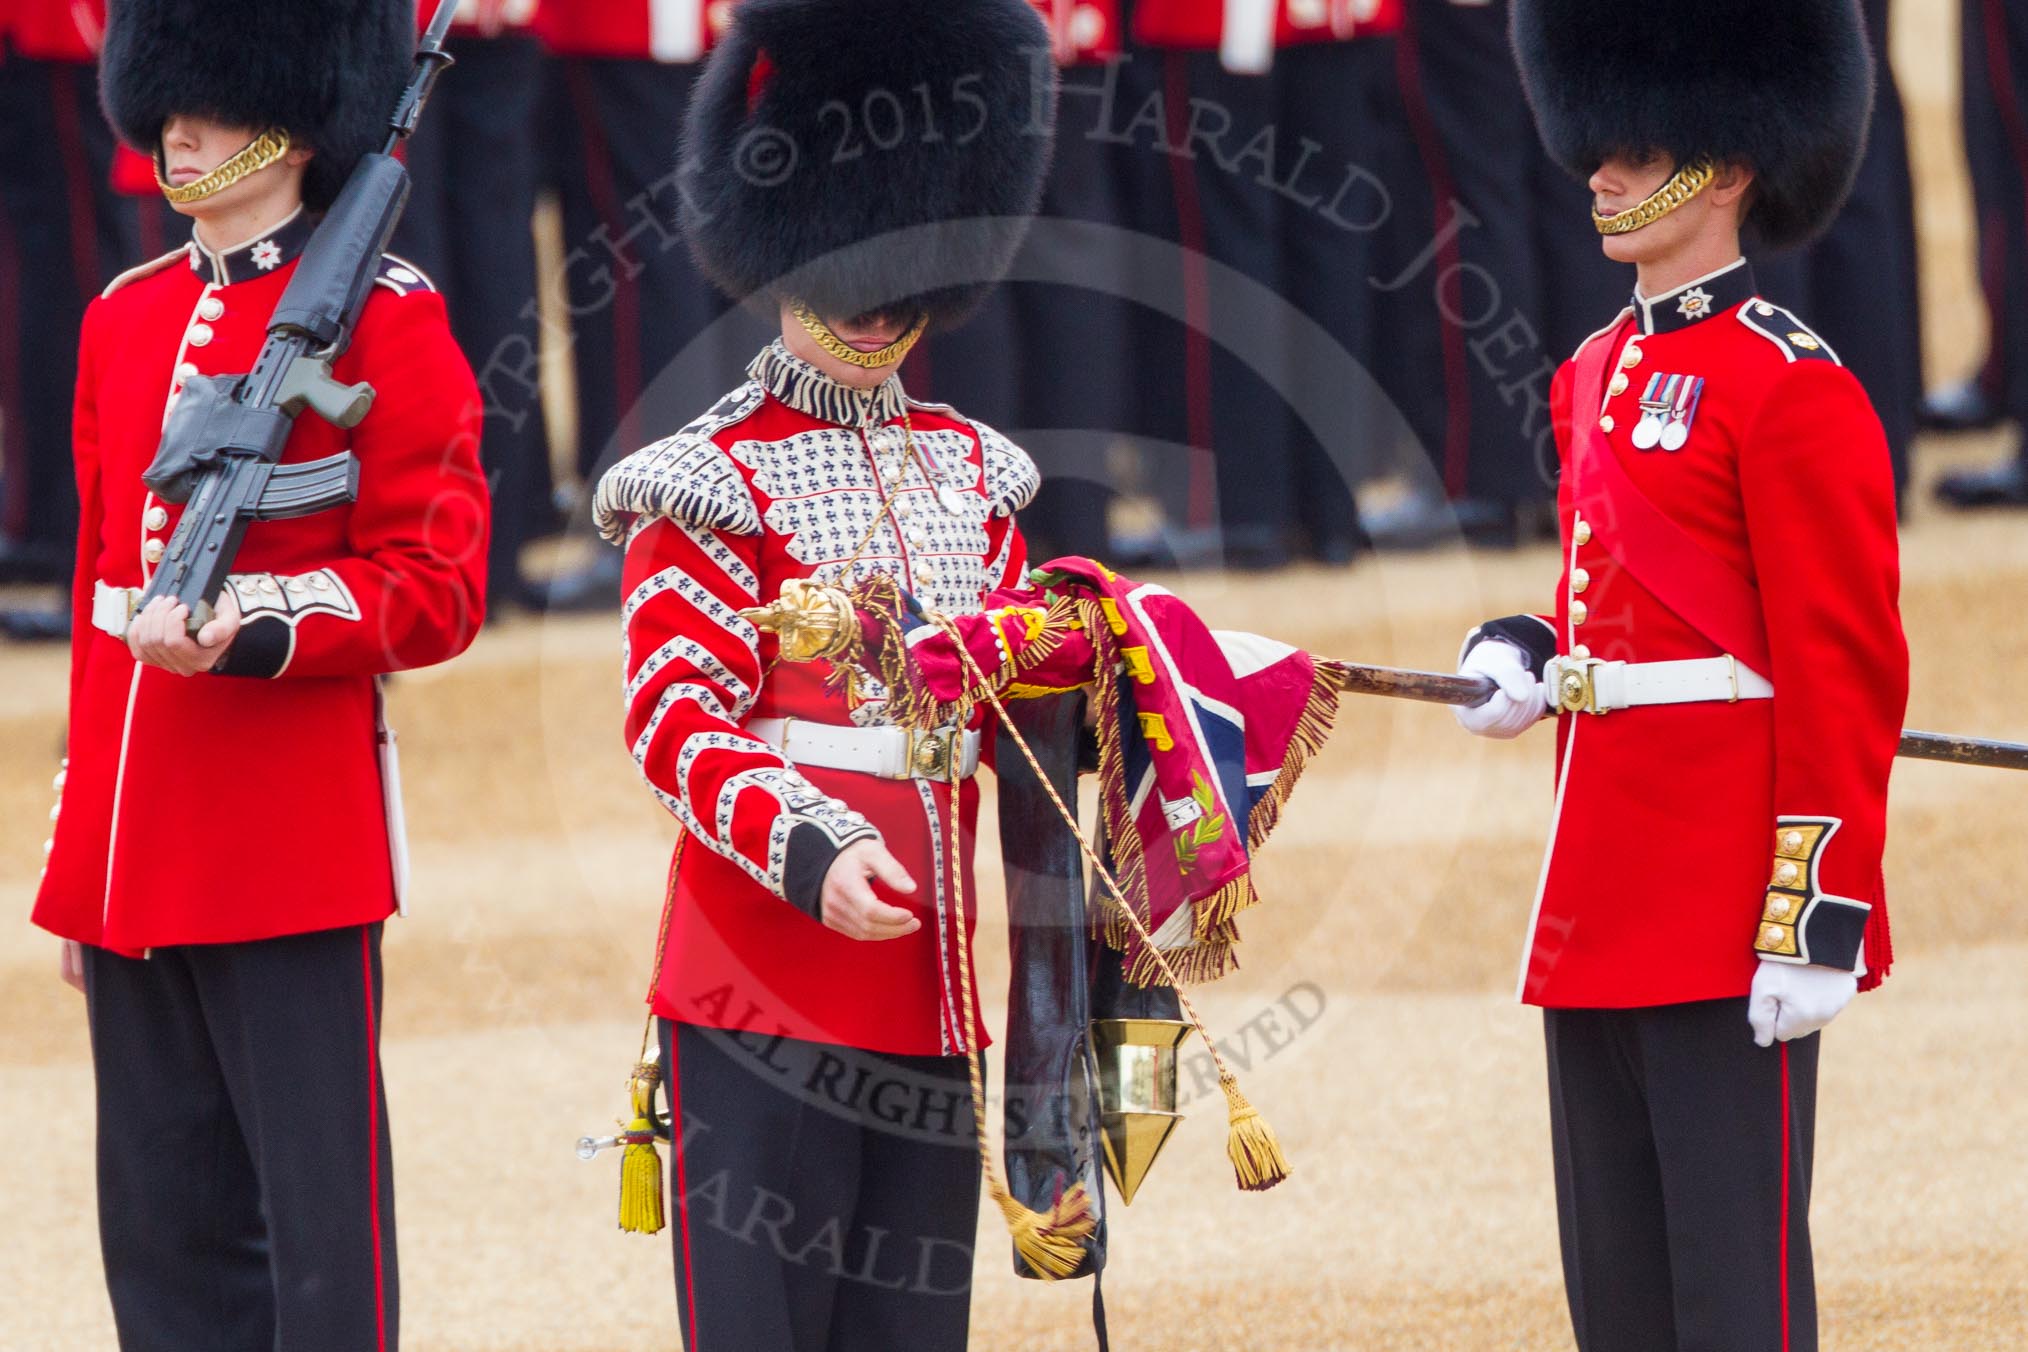 The Colonel's Review 2016.
Horse Guards Parade, Westminster,
London,

United Kingdom,
on 04 June 2016 at 10:34, image #92